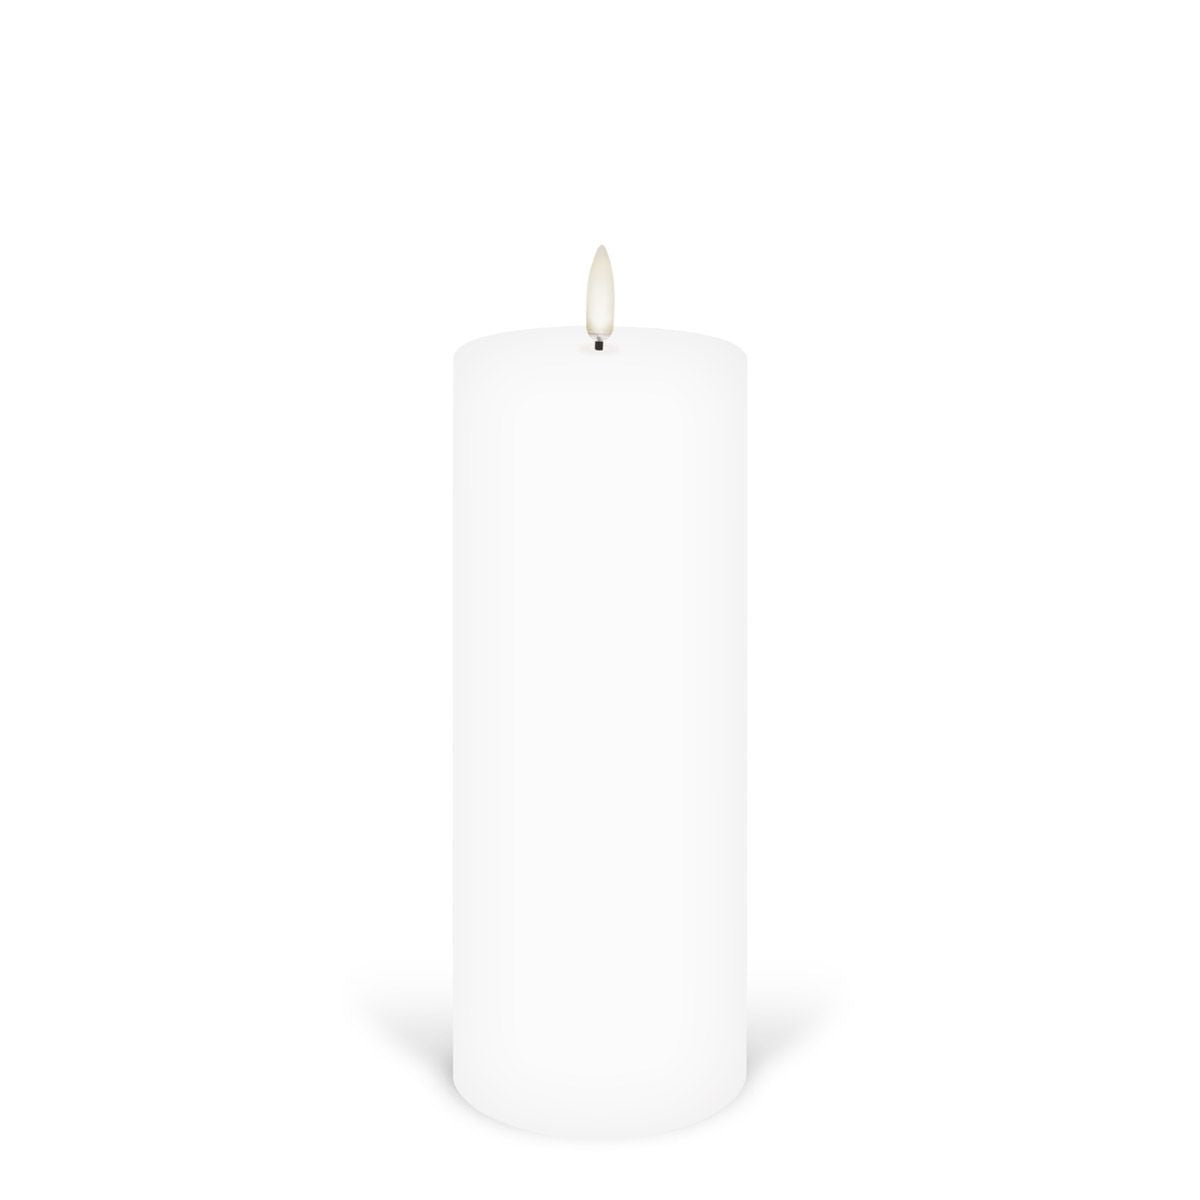 Nordic White Battery Operated Candle 7.8 x 20.3 cm